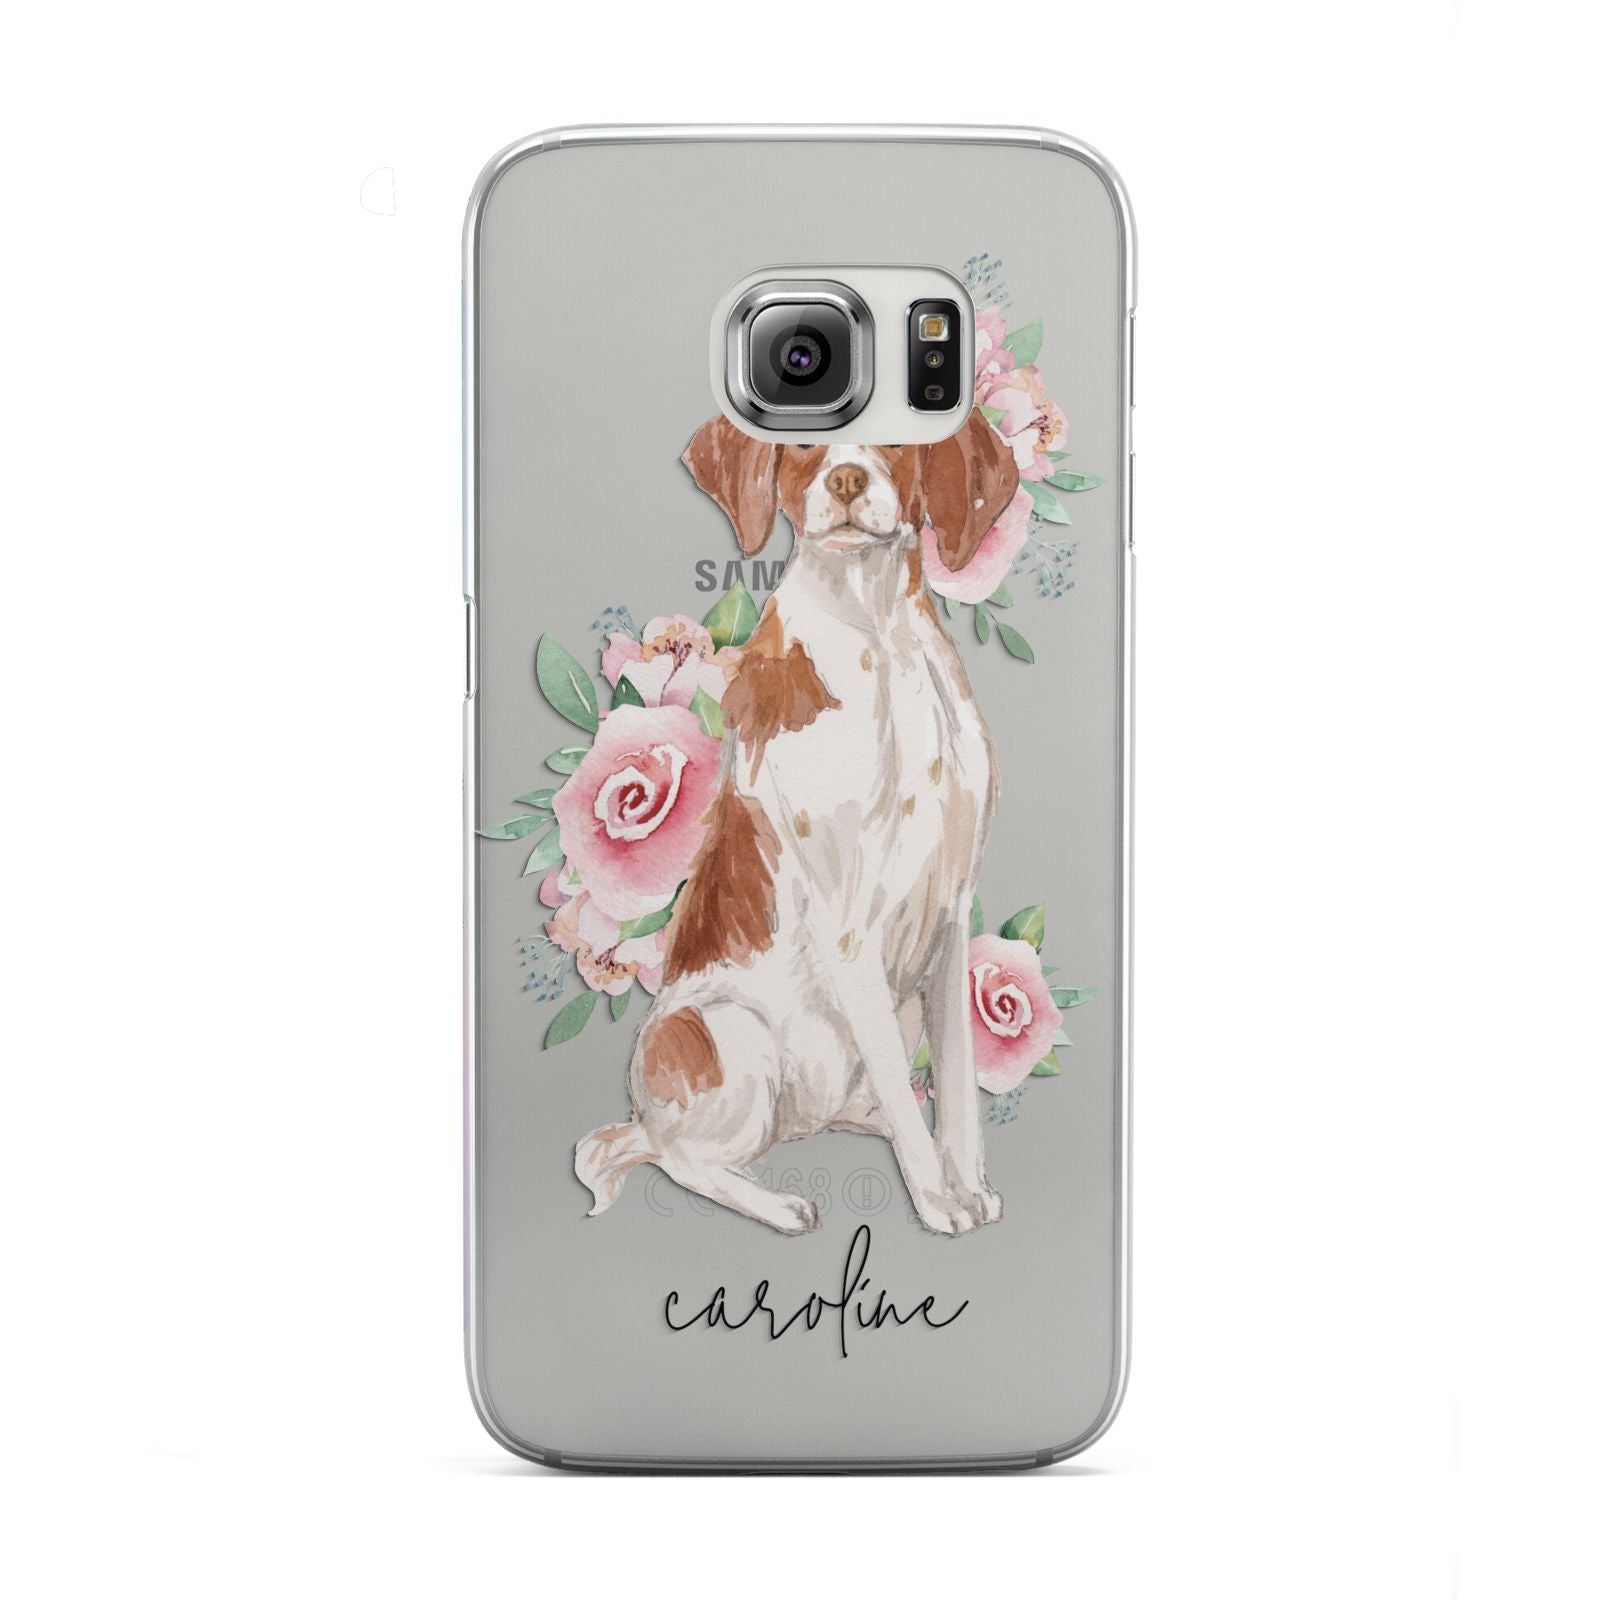 Personalised Brittany Dog Samsung Galaxy S6 Edge Case